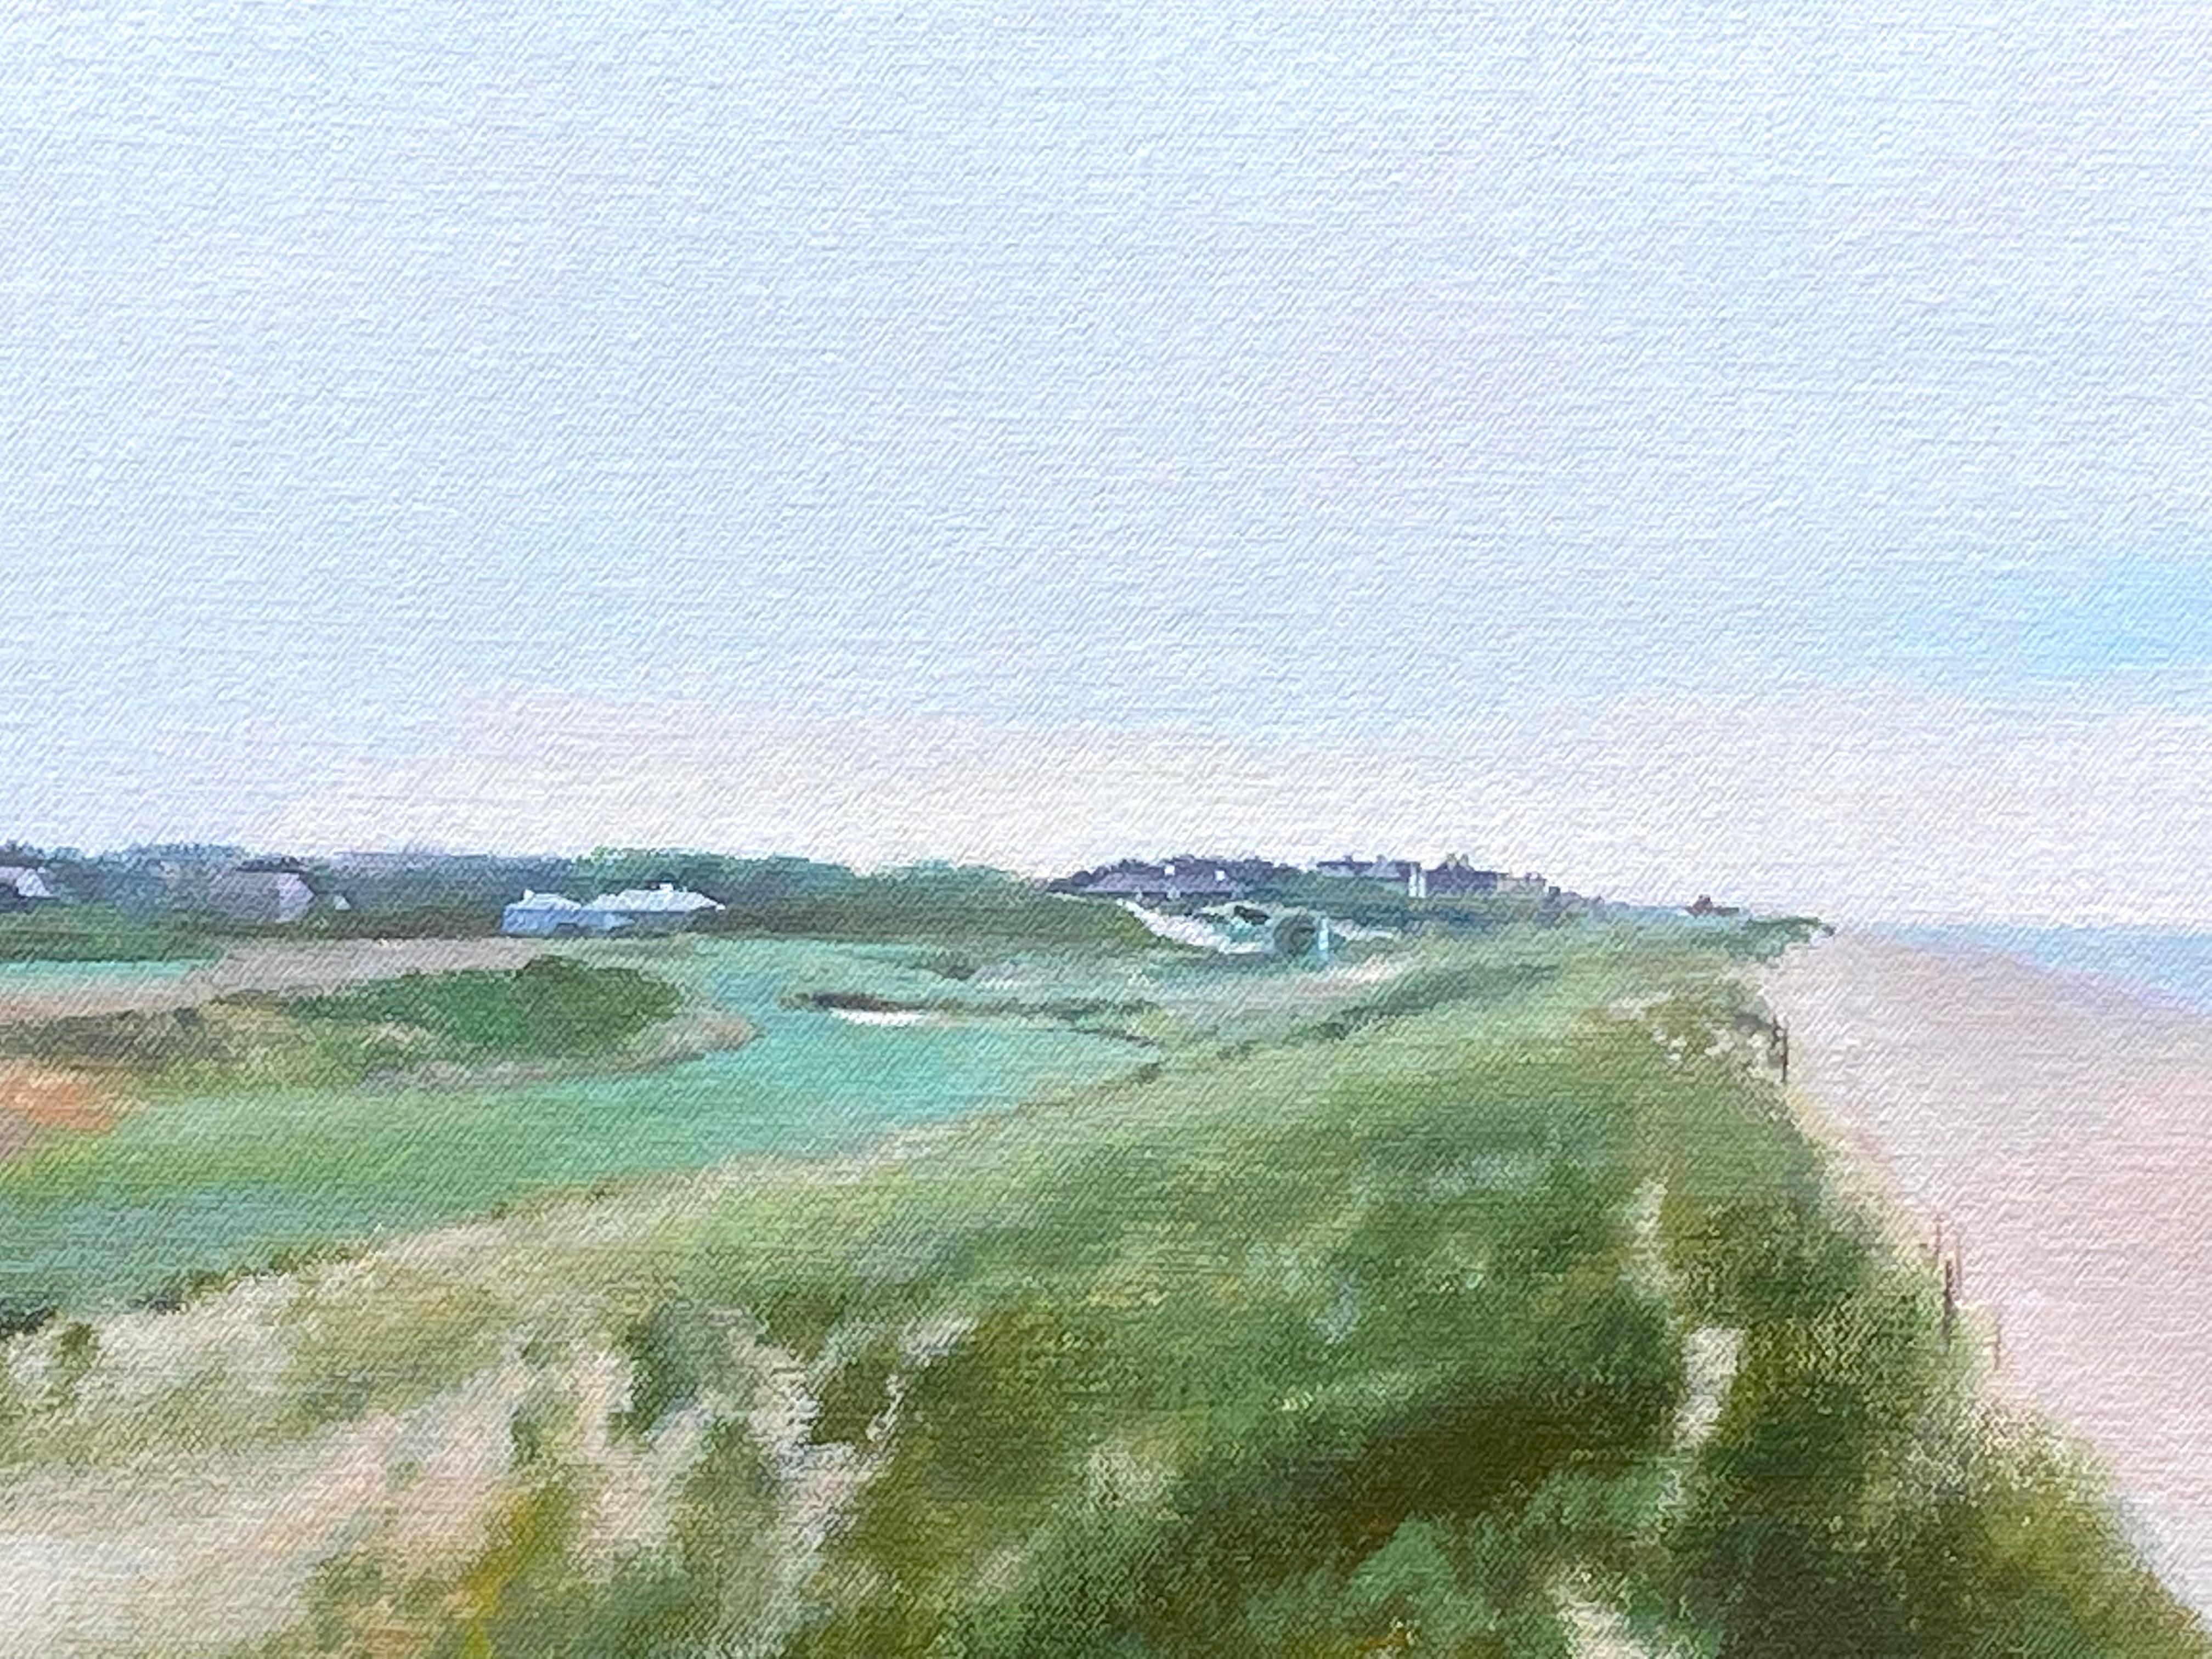 “Maidstone Club, East Hampton” - Painting by Peter D. Schnore